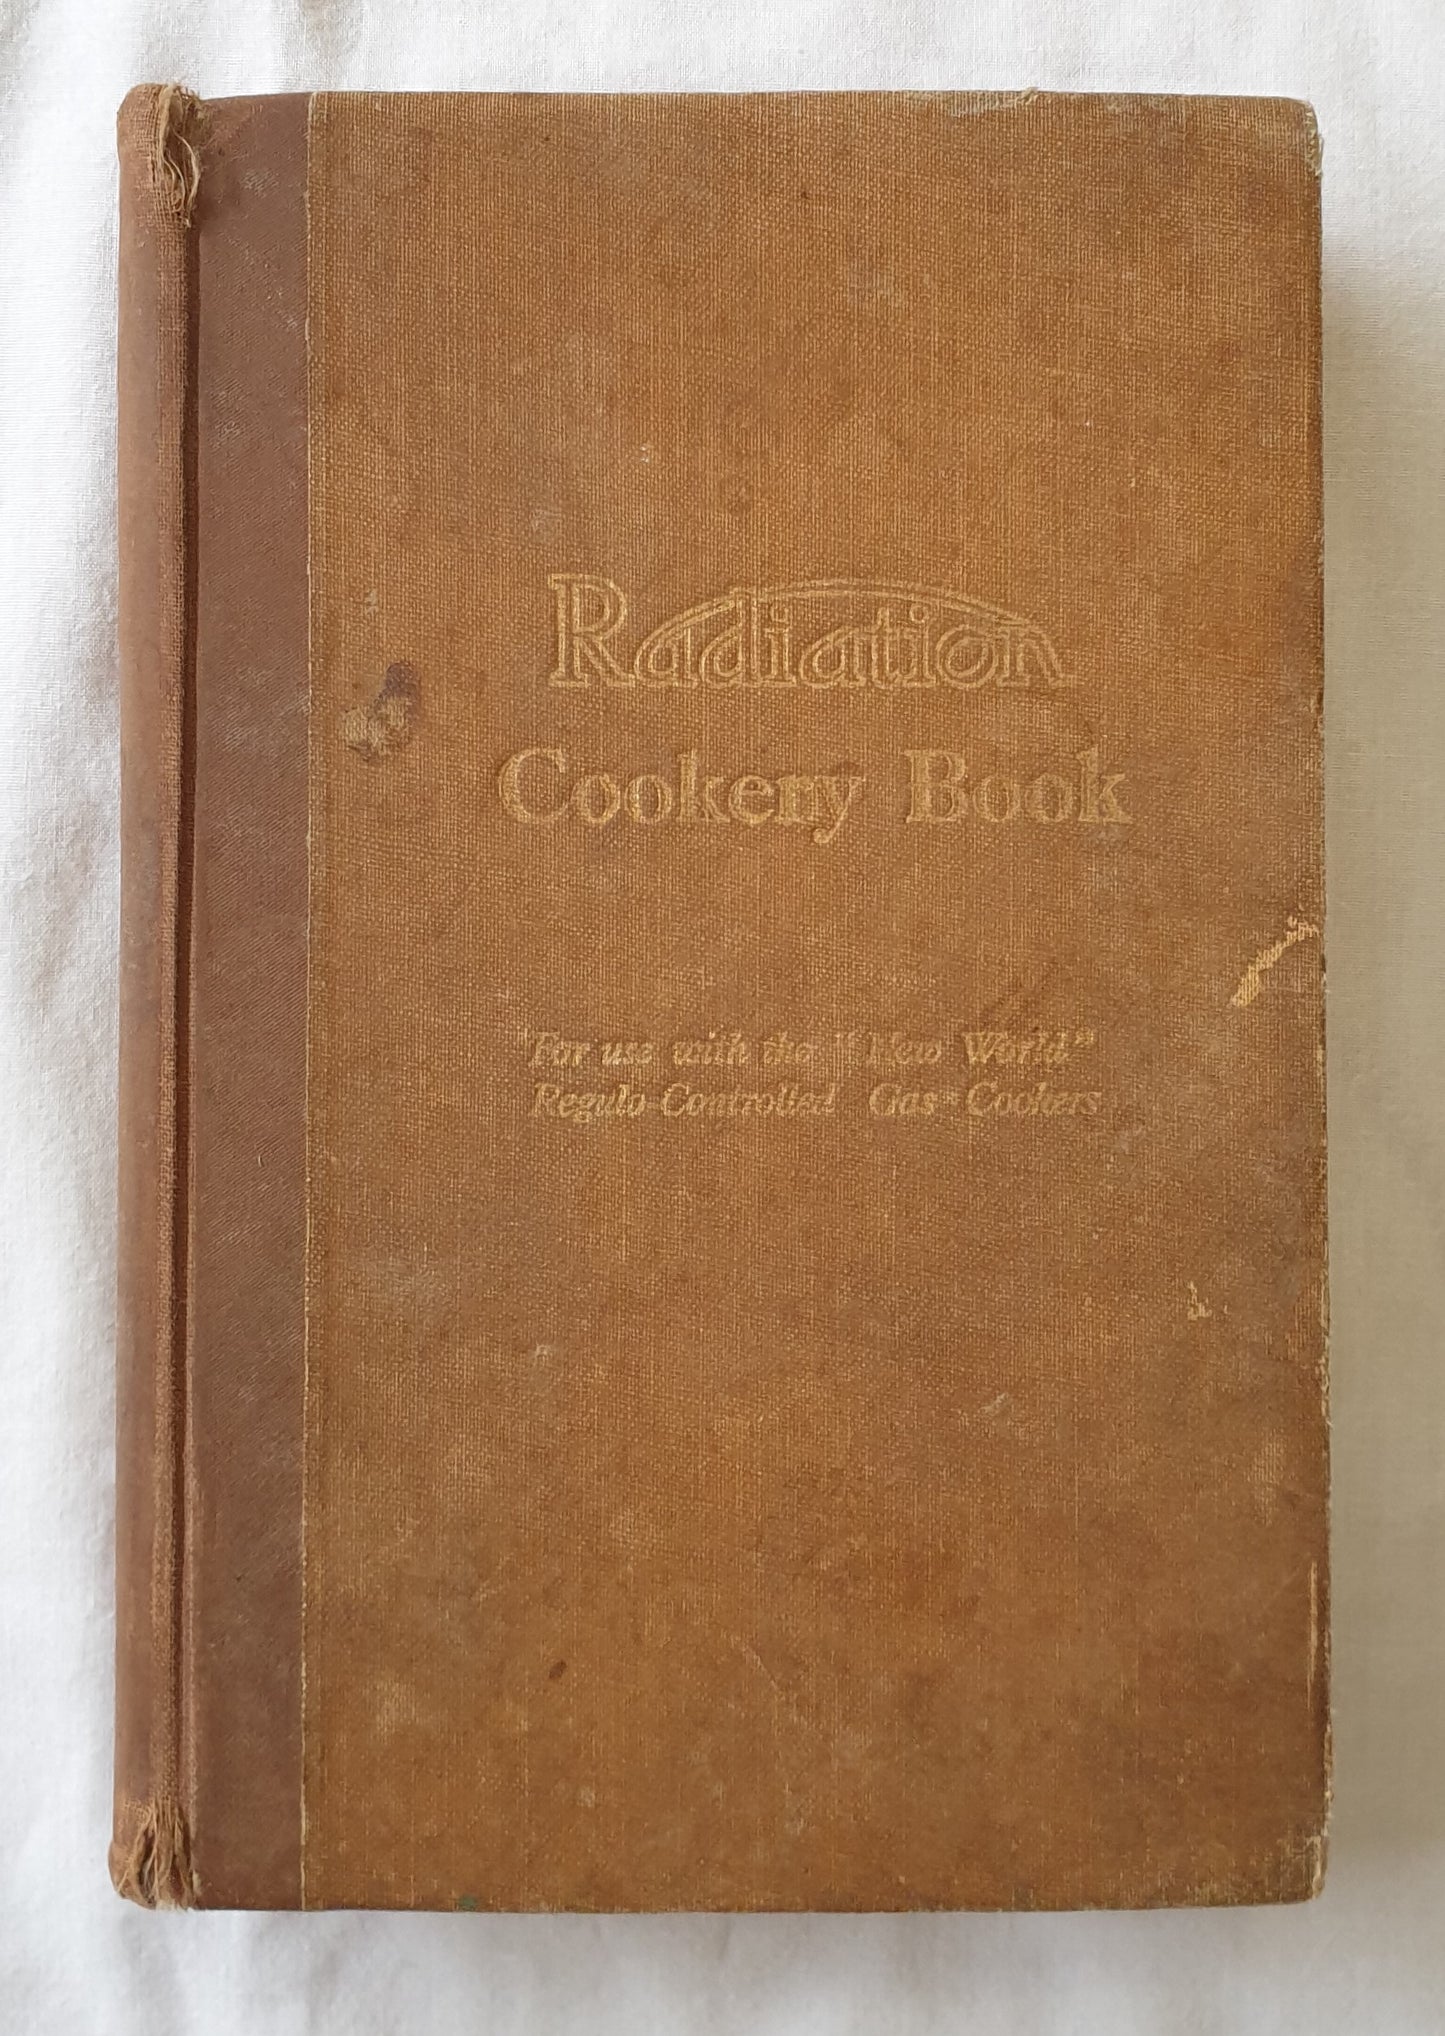 Radiation Cookery Book  A Selection of Proved Recipes for Use with Radiation “New-World” “Regulo” – Controlled Gas Cookers  by Radiation